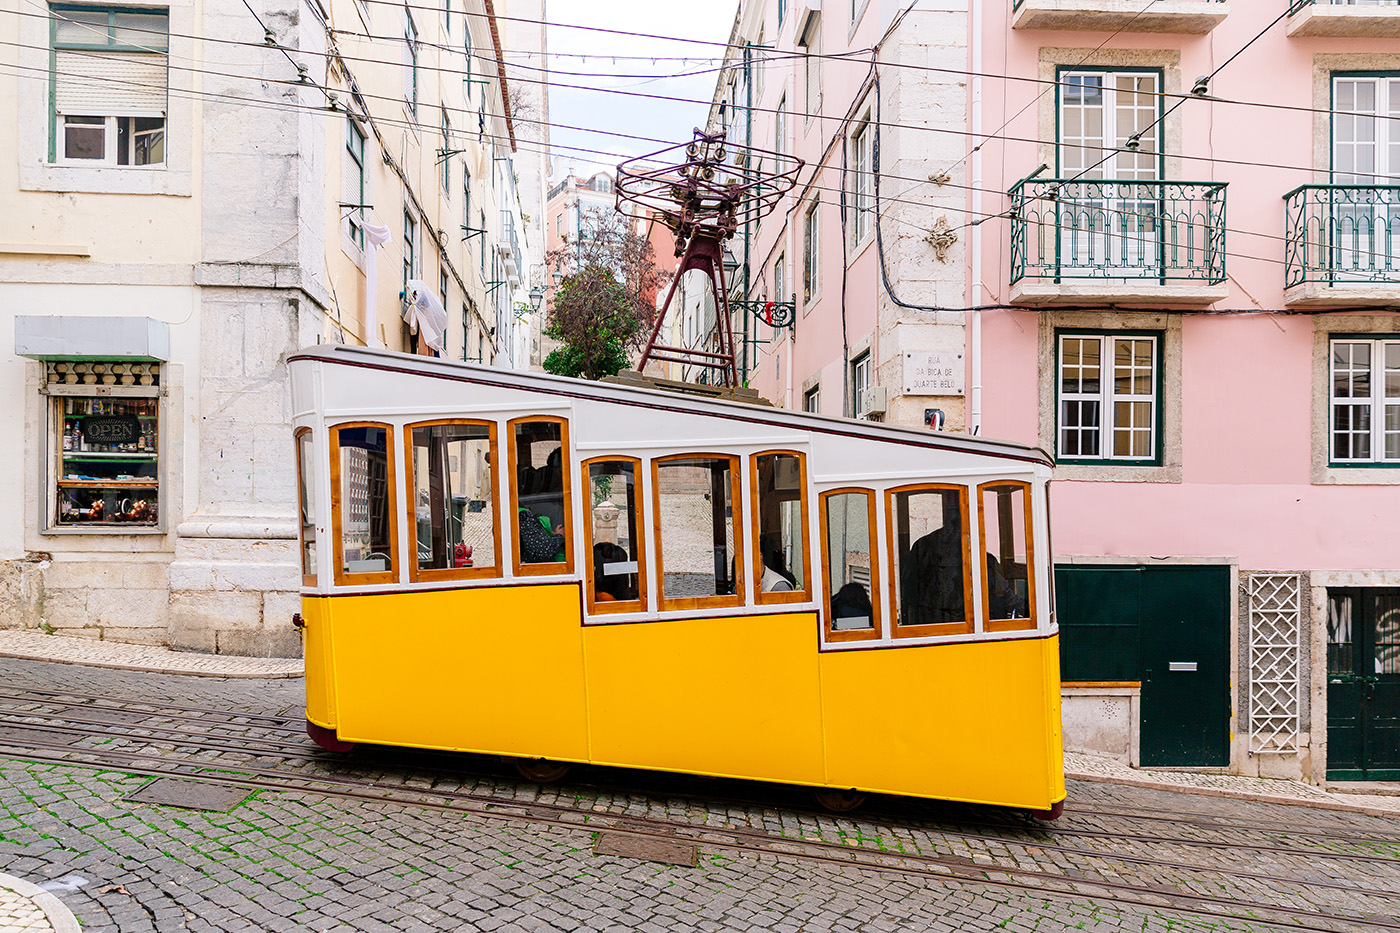 Discover Lisbon's seven-hill topography offers diverse neighborhoods and stunning views.